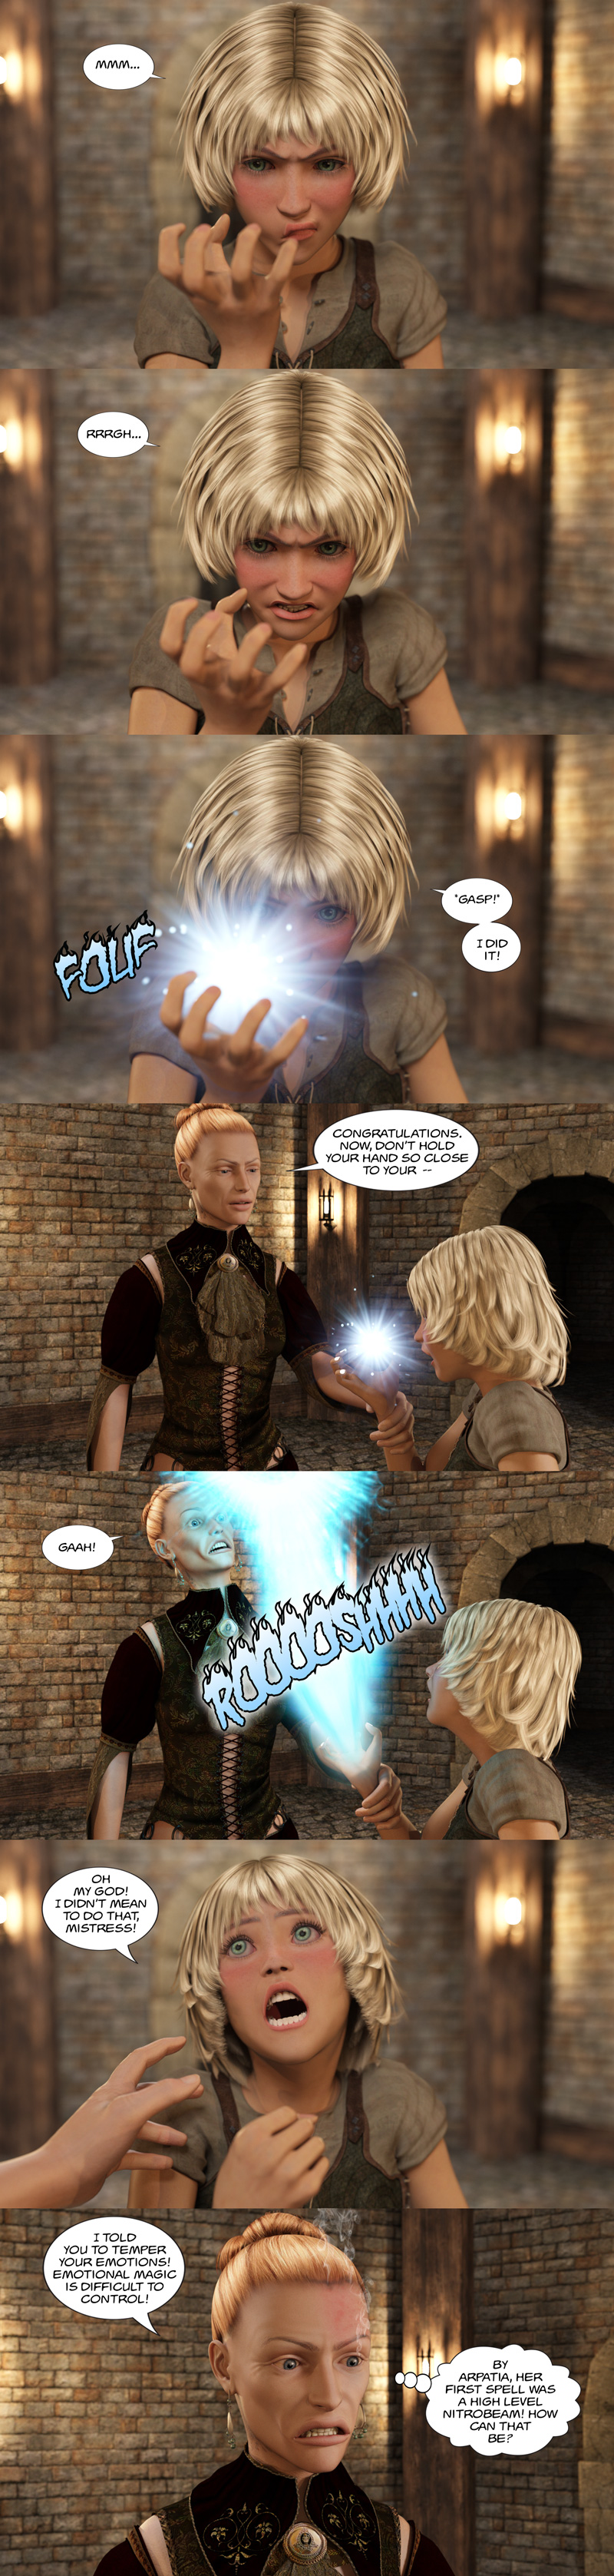 Chapter 15, page 14 – Little Tirin’s first spell